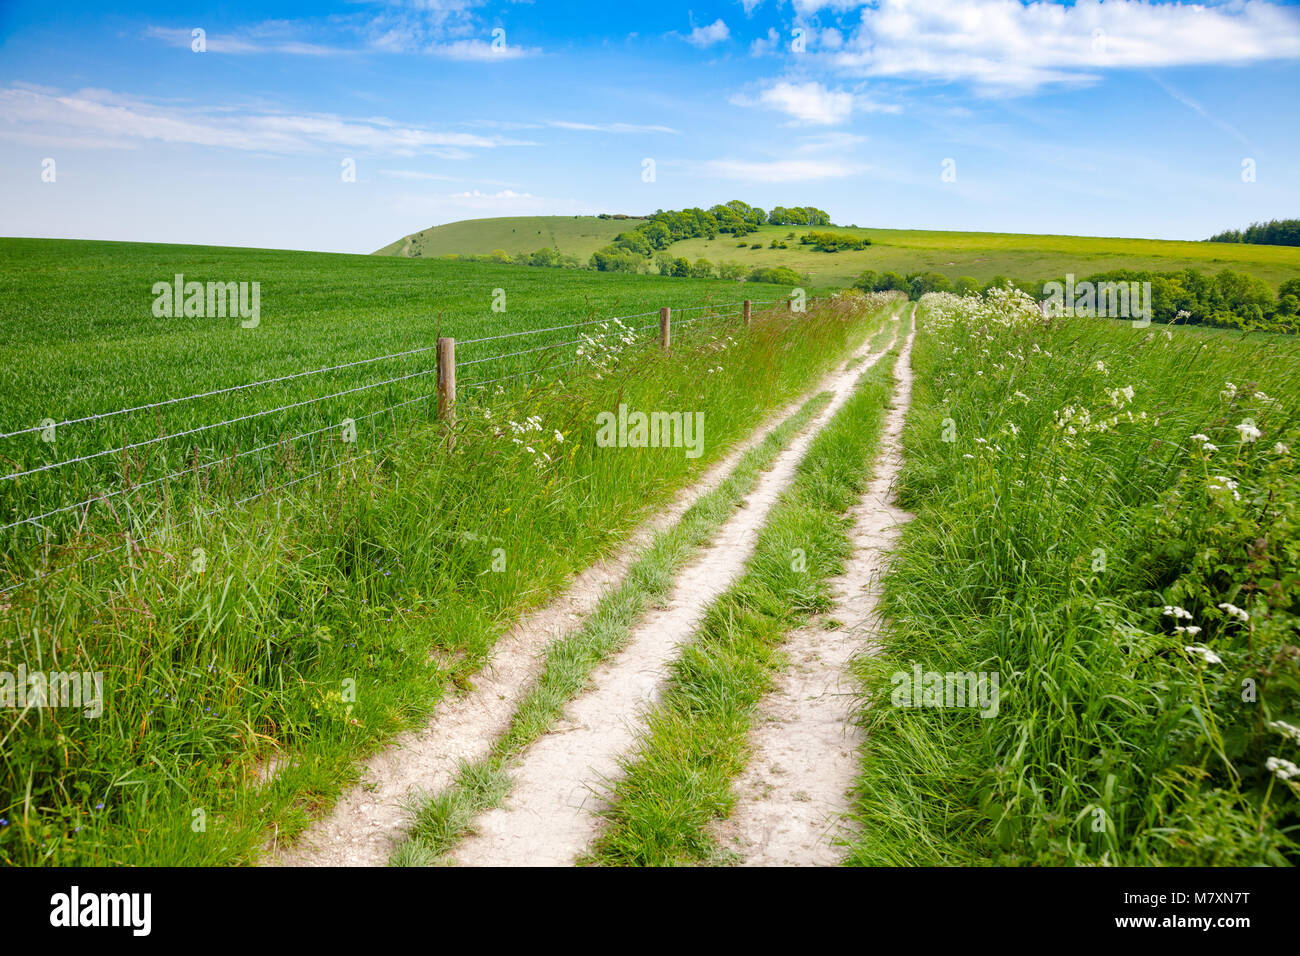 South Downs Way, a  long distance footpath and bridleway along the South Downs hills in Sussex, Southern England, UK Stock Photo